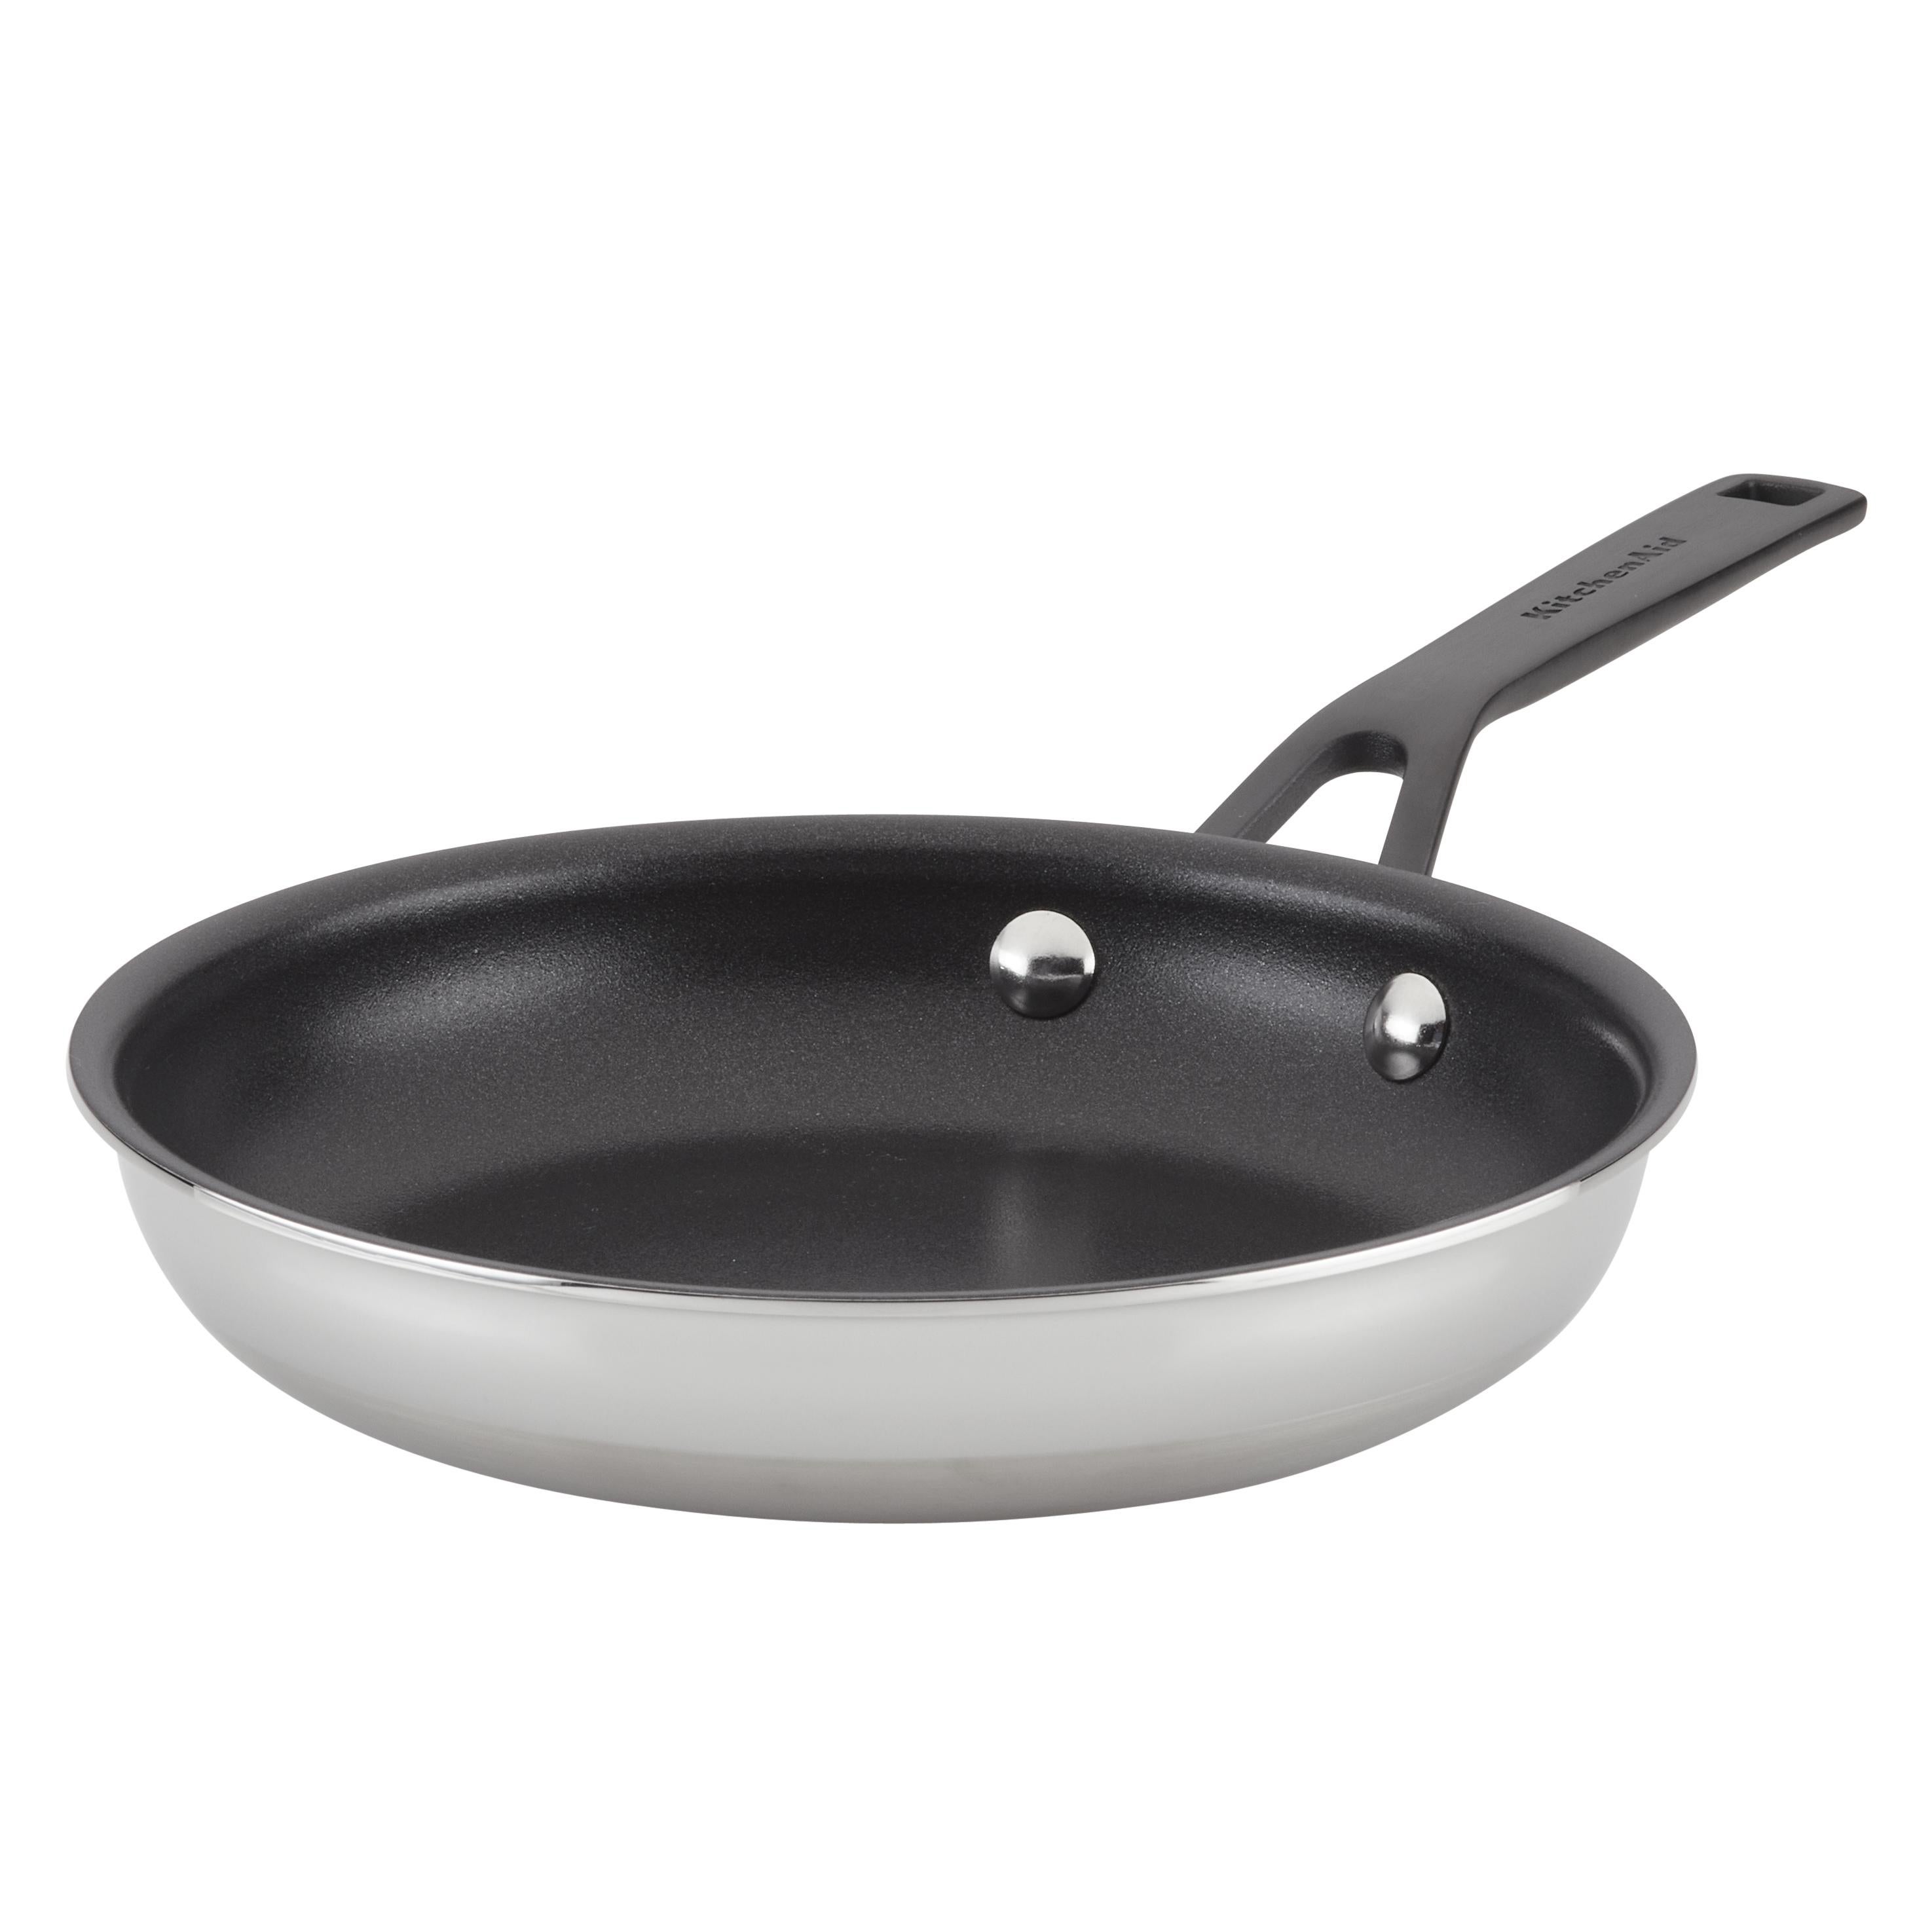 Zwilling Clad CFX 12-Inch, Ceramic, Non-Stick, Stainless Steel Fry Pan